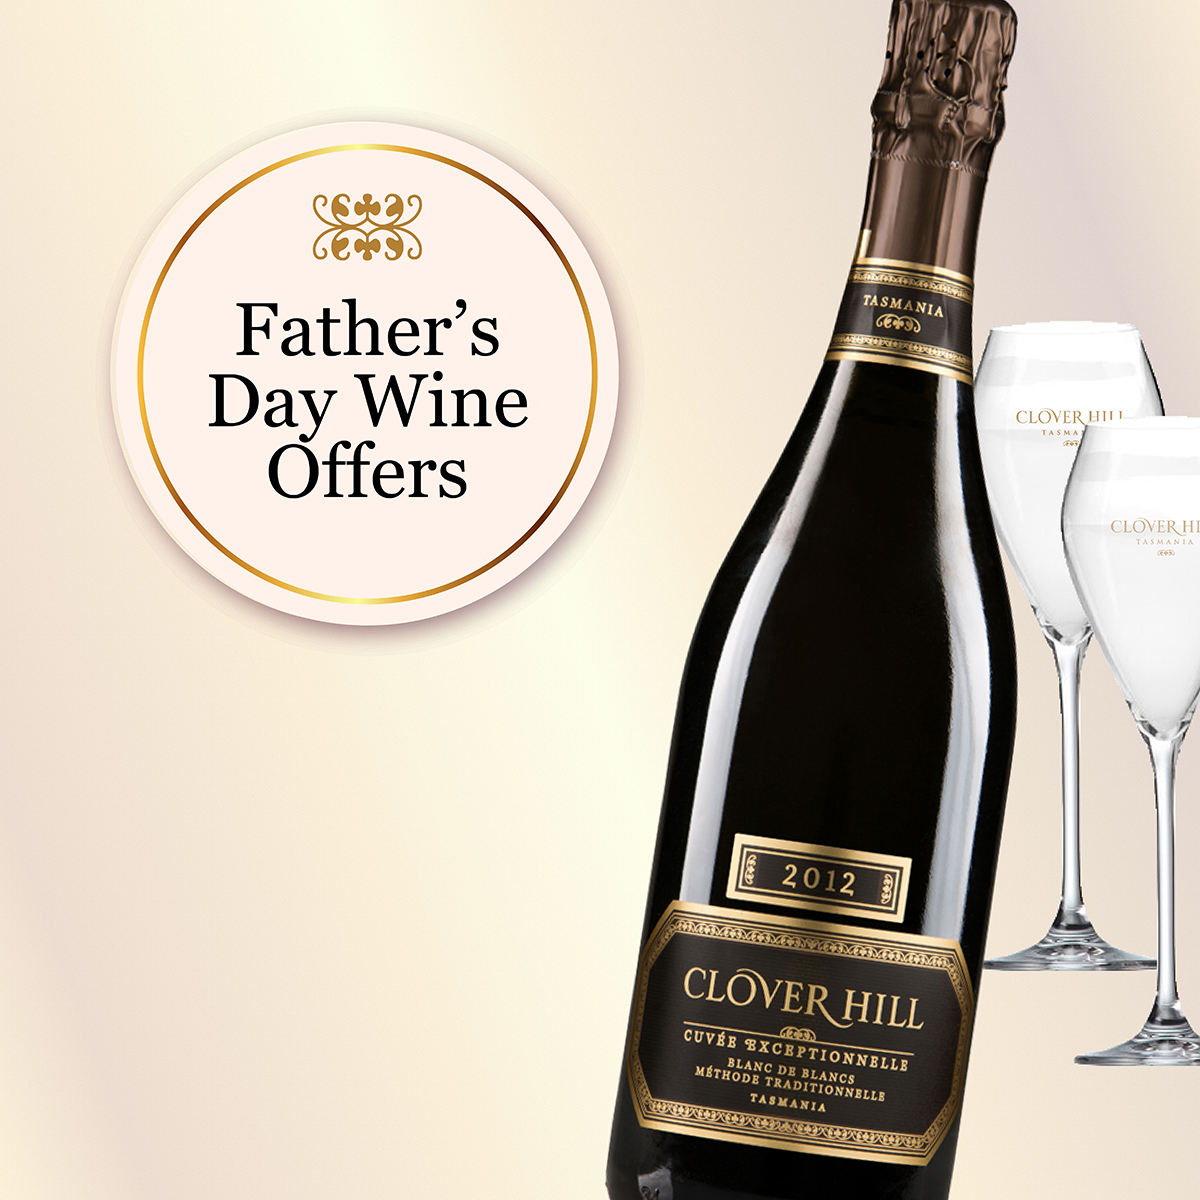 Father's Day Wine Offers